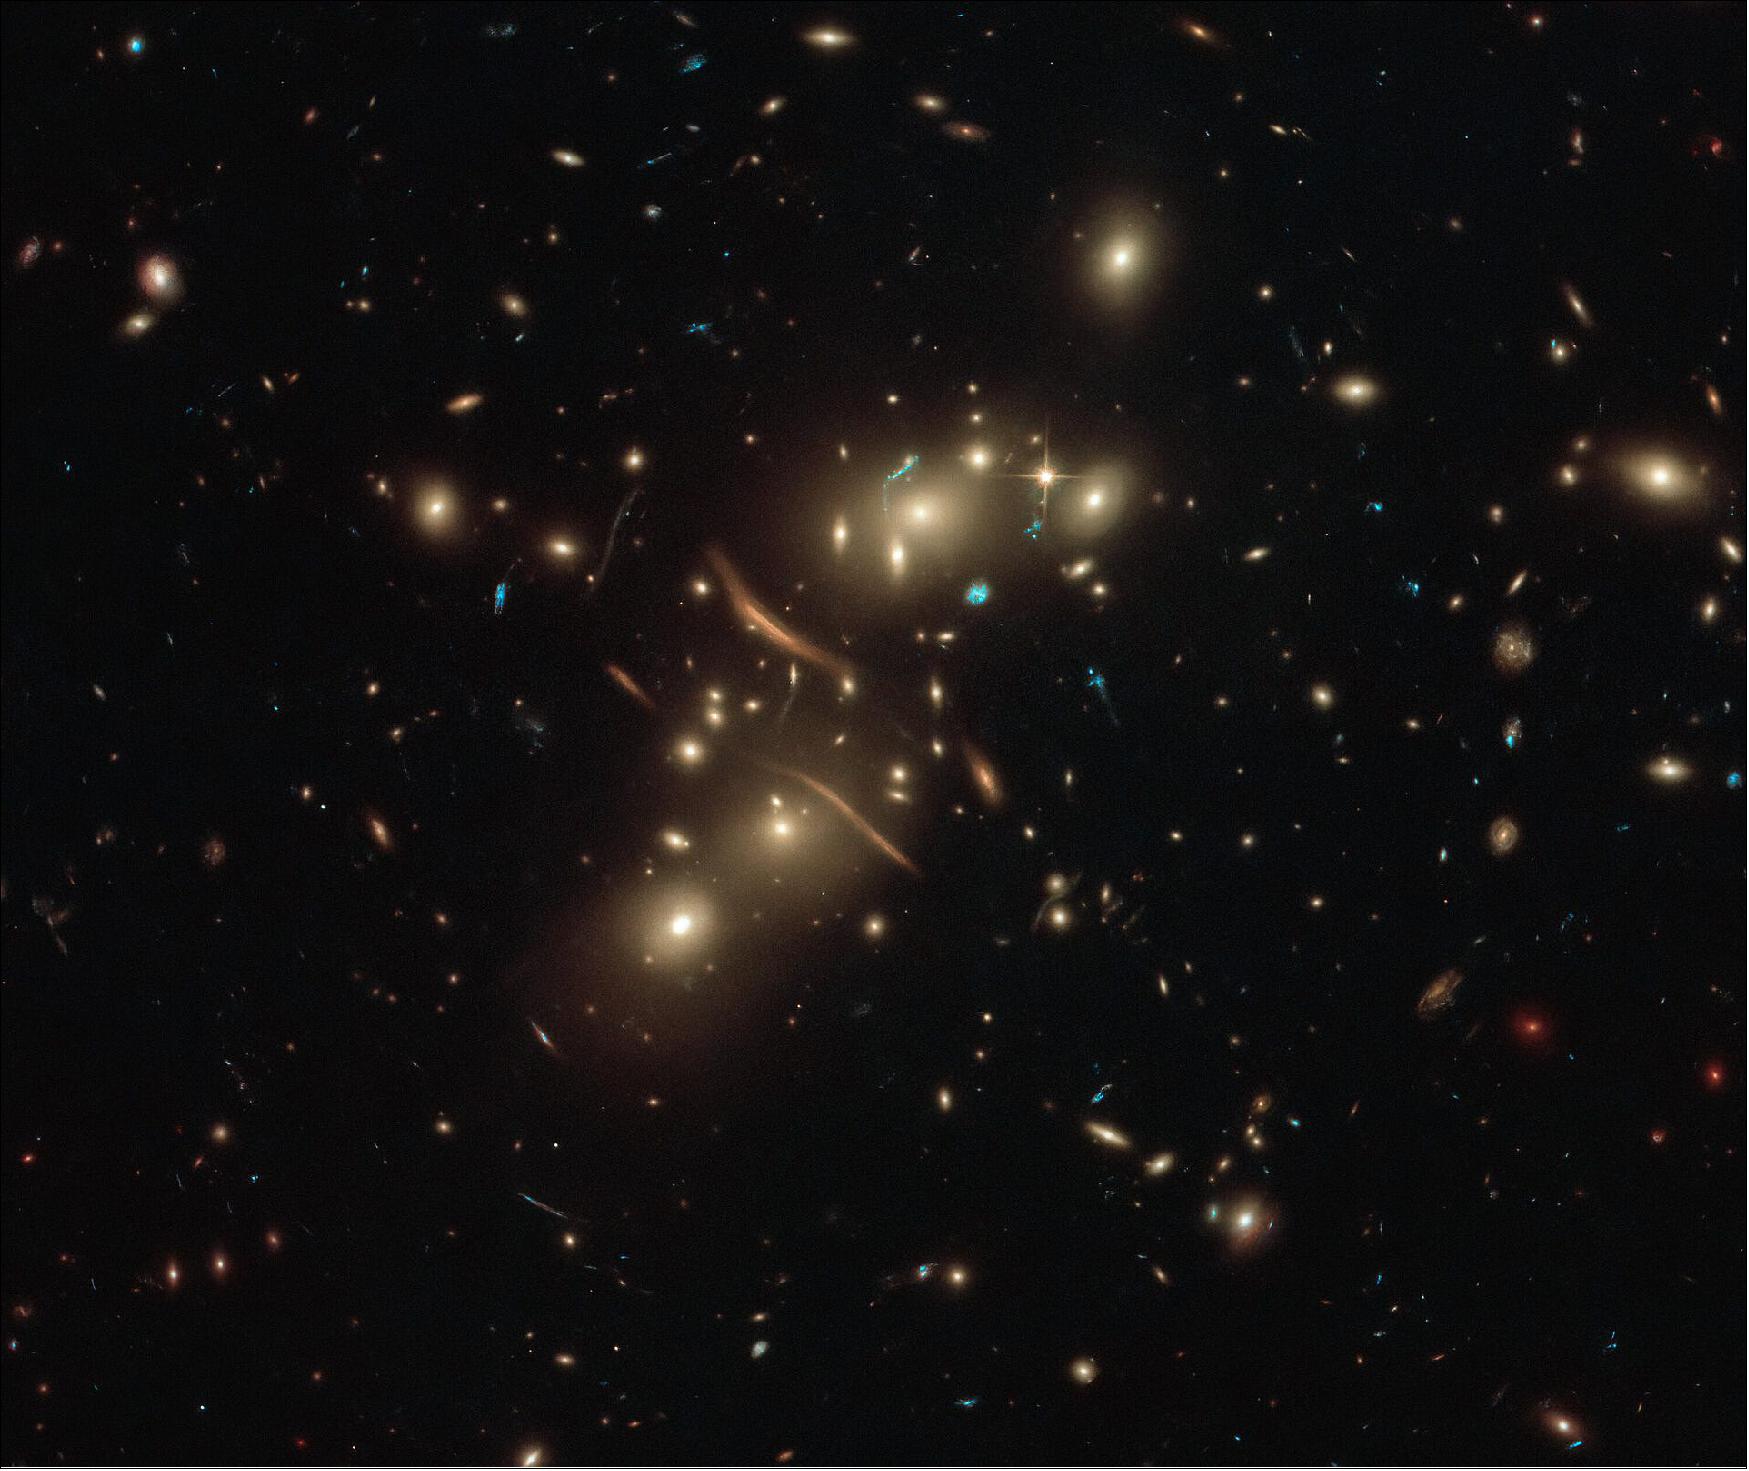 Figure 95: Gravitational lensing occurs when an object’s mass causes light to bend. The curved crescents and s-shapes of light in this image are not curved galaxies, but are light from galaxies that actually lie beyond Abell 2813. The galaxy cluster has so much mass that it acts as a gravitational lens, causing light from more distant galaxies to bend around it. These distortions can appear as many different shapes, such as long lines or arcs (image credit: ESA/Hubble & NASA, D. Coe; CC BY 4.0)